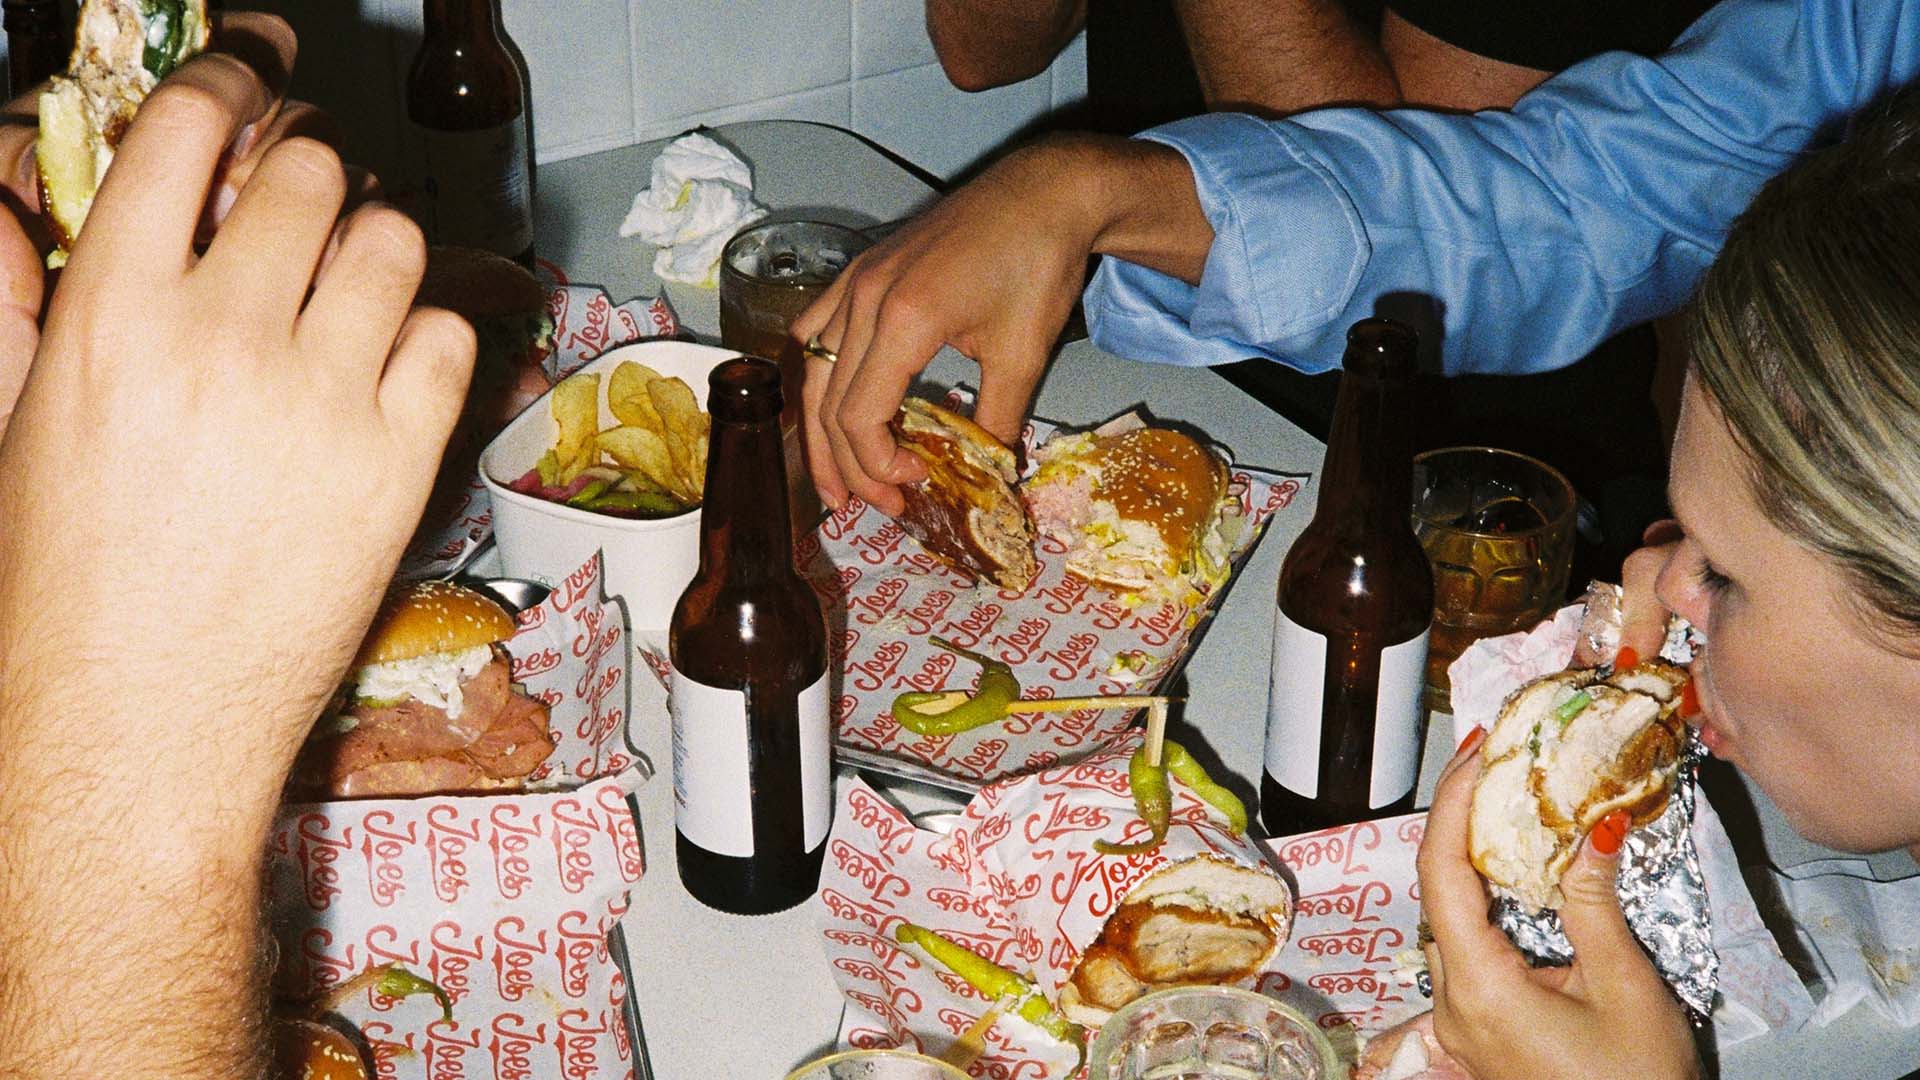 Now Open: NYC-Inspired Sandwich Joint and Bar Joe's Deli Has Launched Its First Brisbane Diner